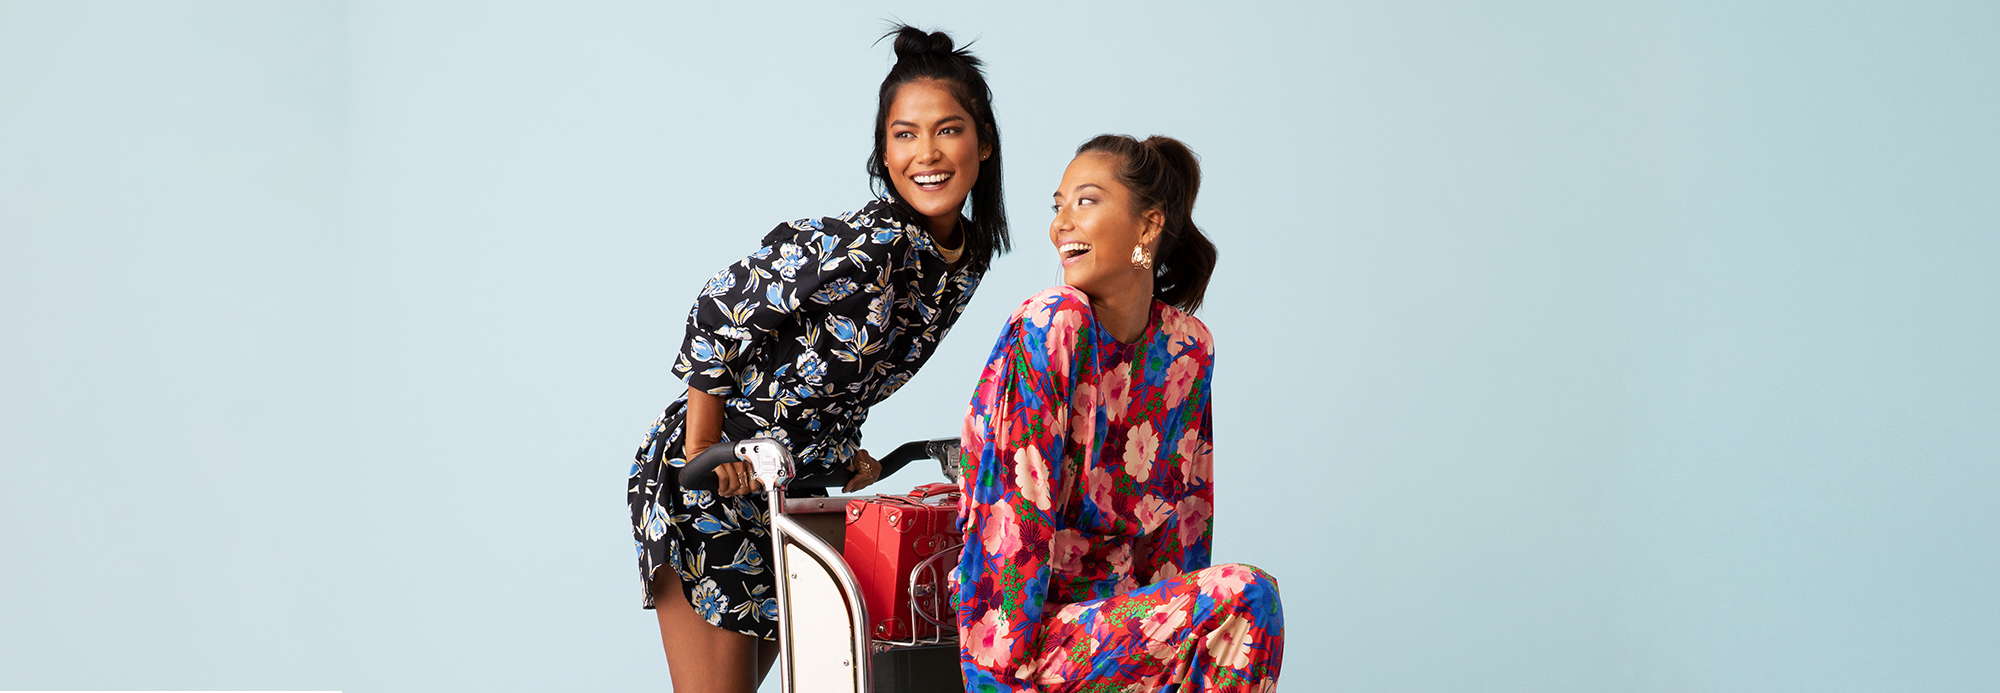 Two young women in bright floral dresses posing on a luggage cart